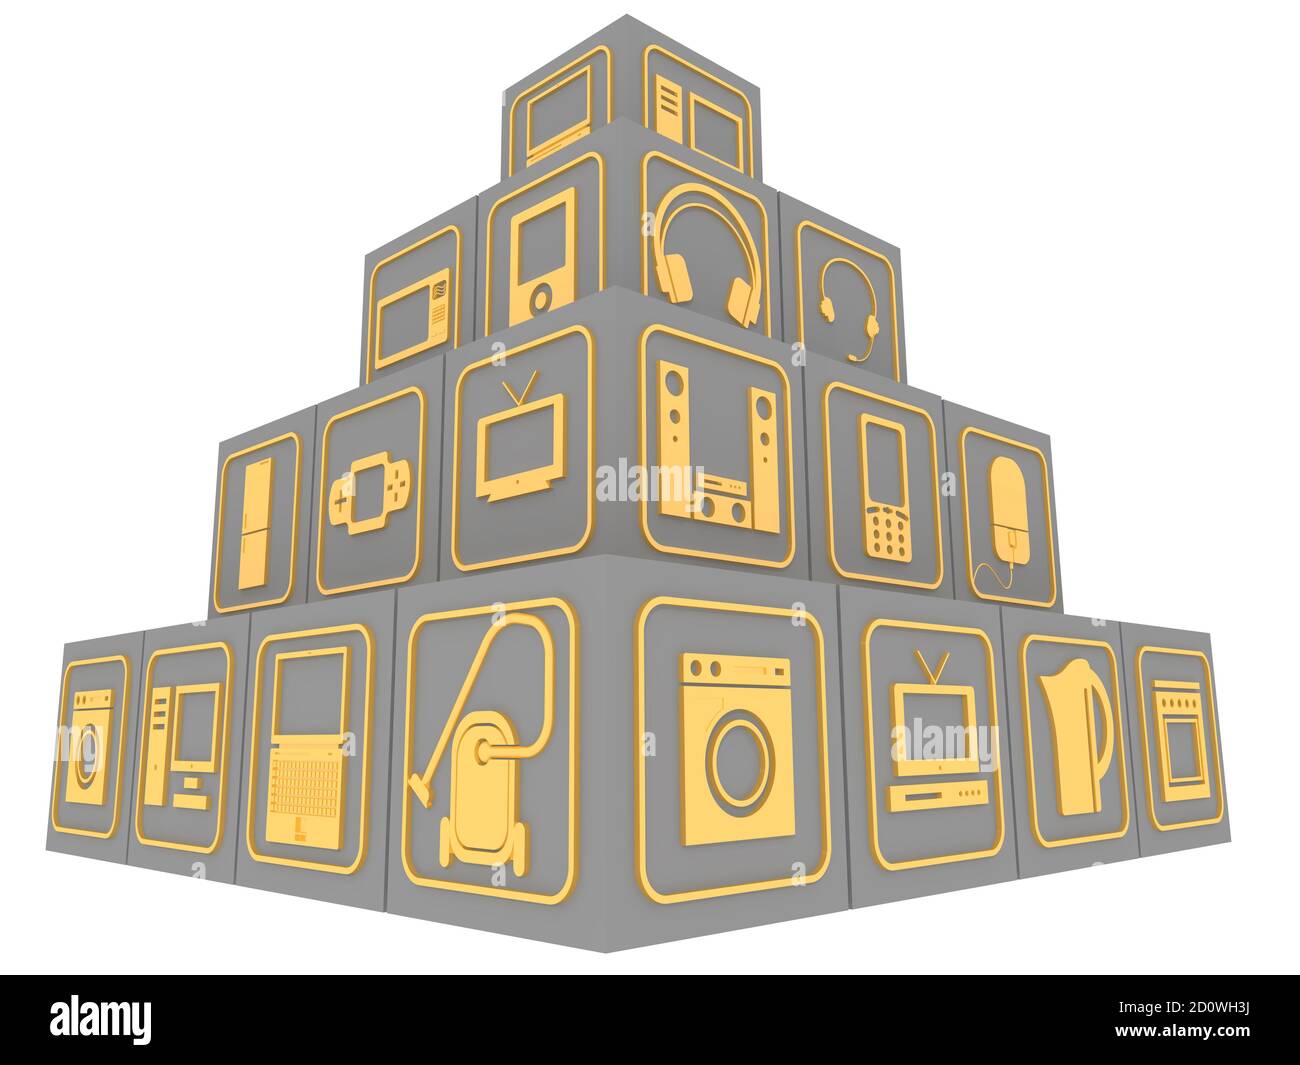 Cubes with symbols of household electronic equipment. Cubes stacked pyramid with gold symbols of consumer electronics. Isolated. 3D Illustration Stock Photo